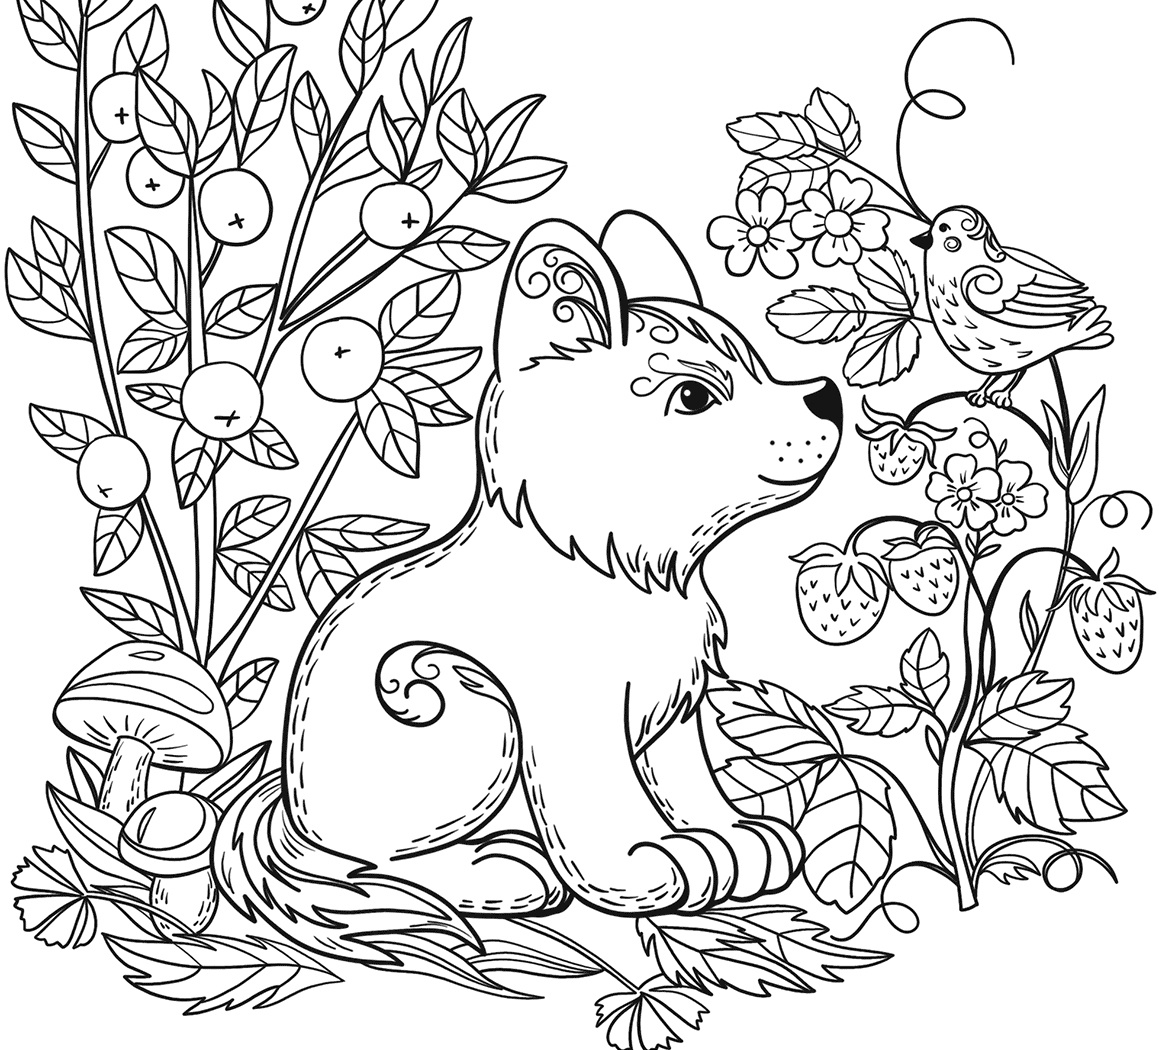 Coloring Ideas : Free Animal Coloring Pages Fresh Wild Gallery - Free Printable Wild Animal Coloring Pages